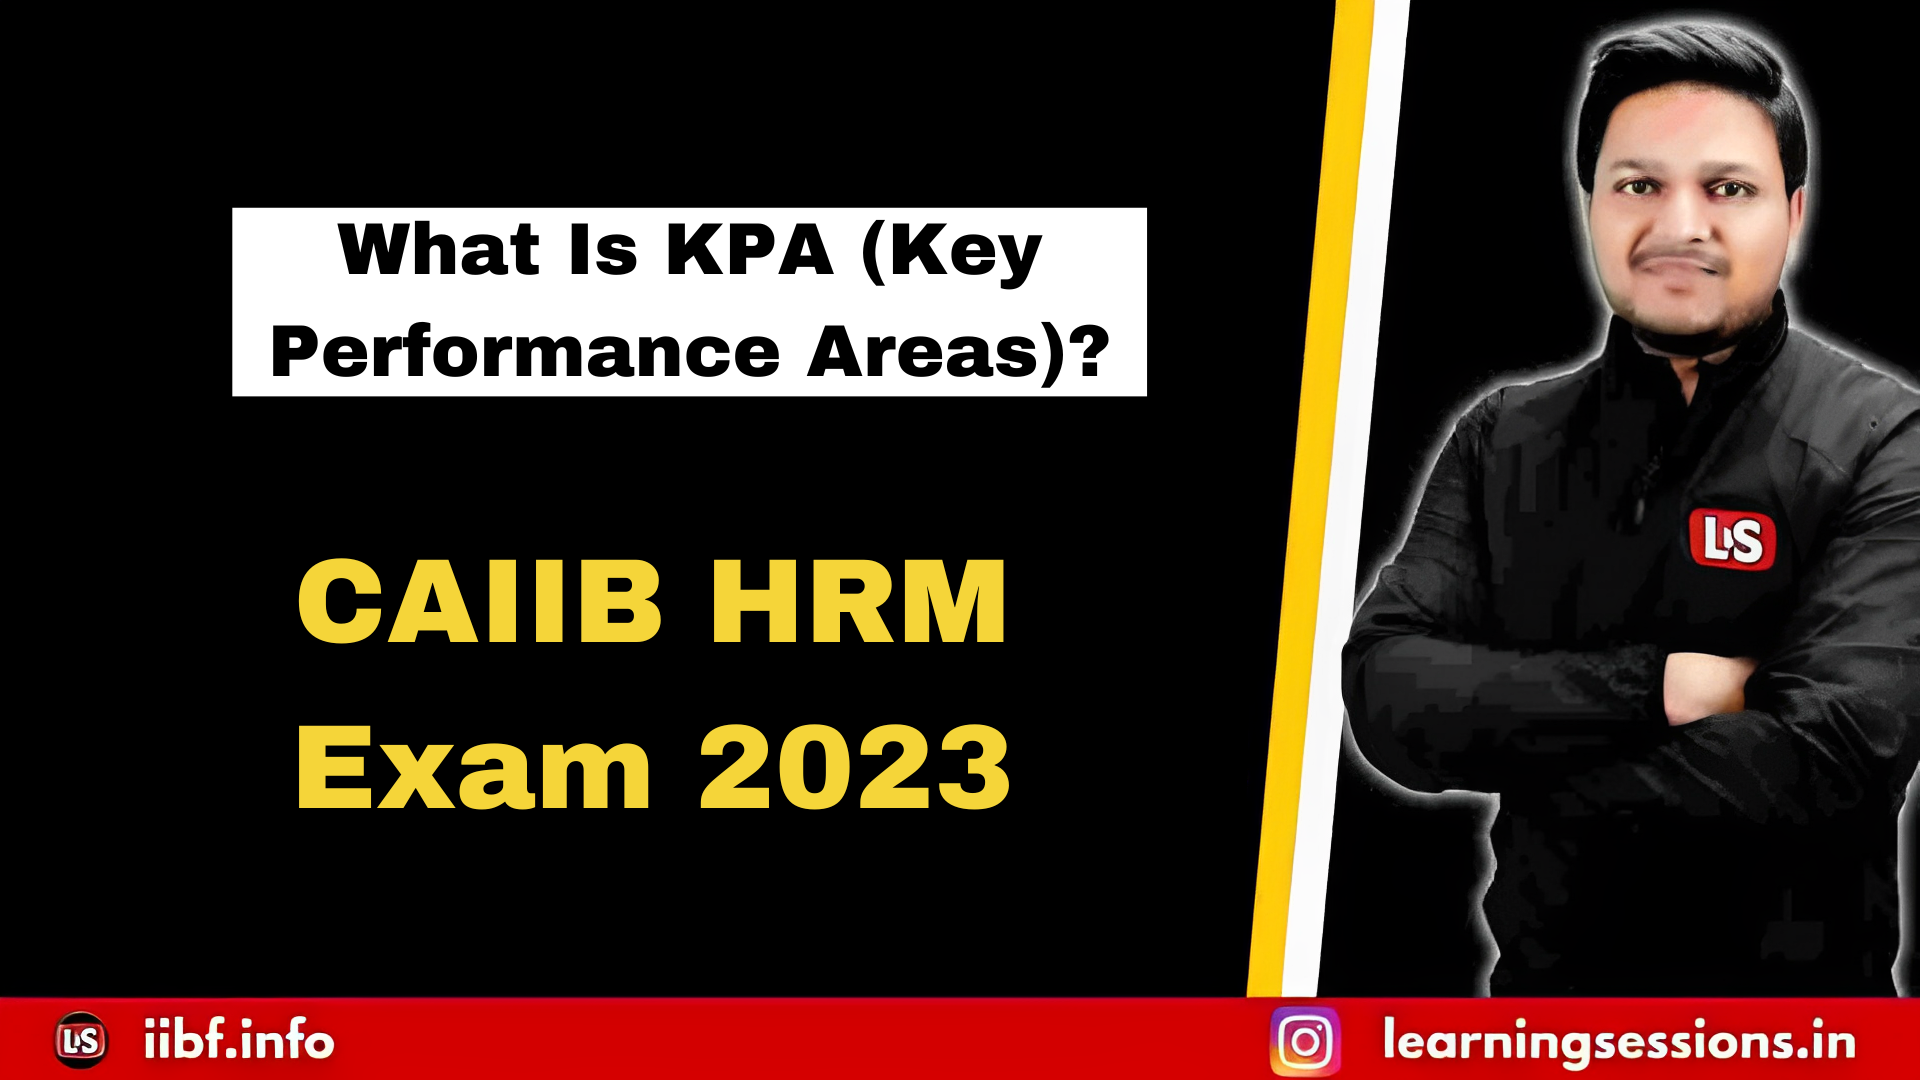 What Is KPA (Key Performance Areas)?